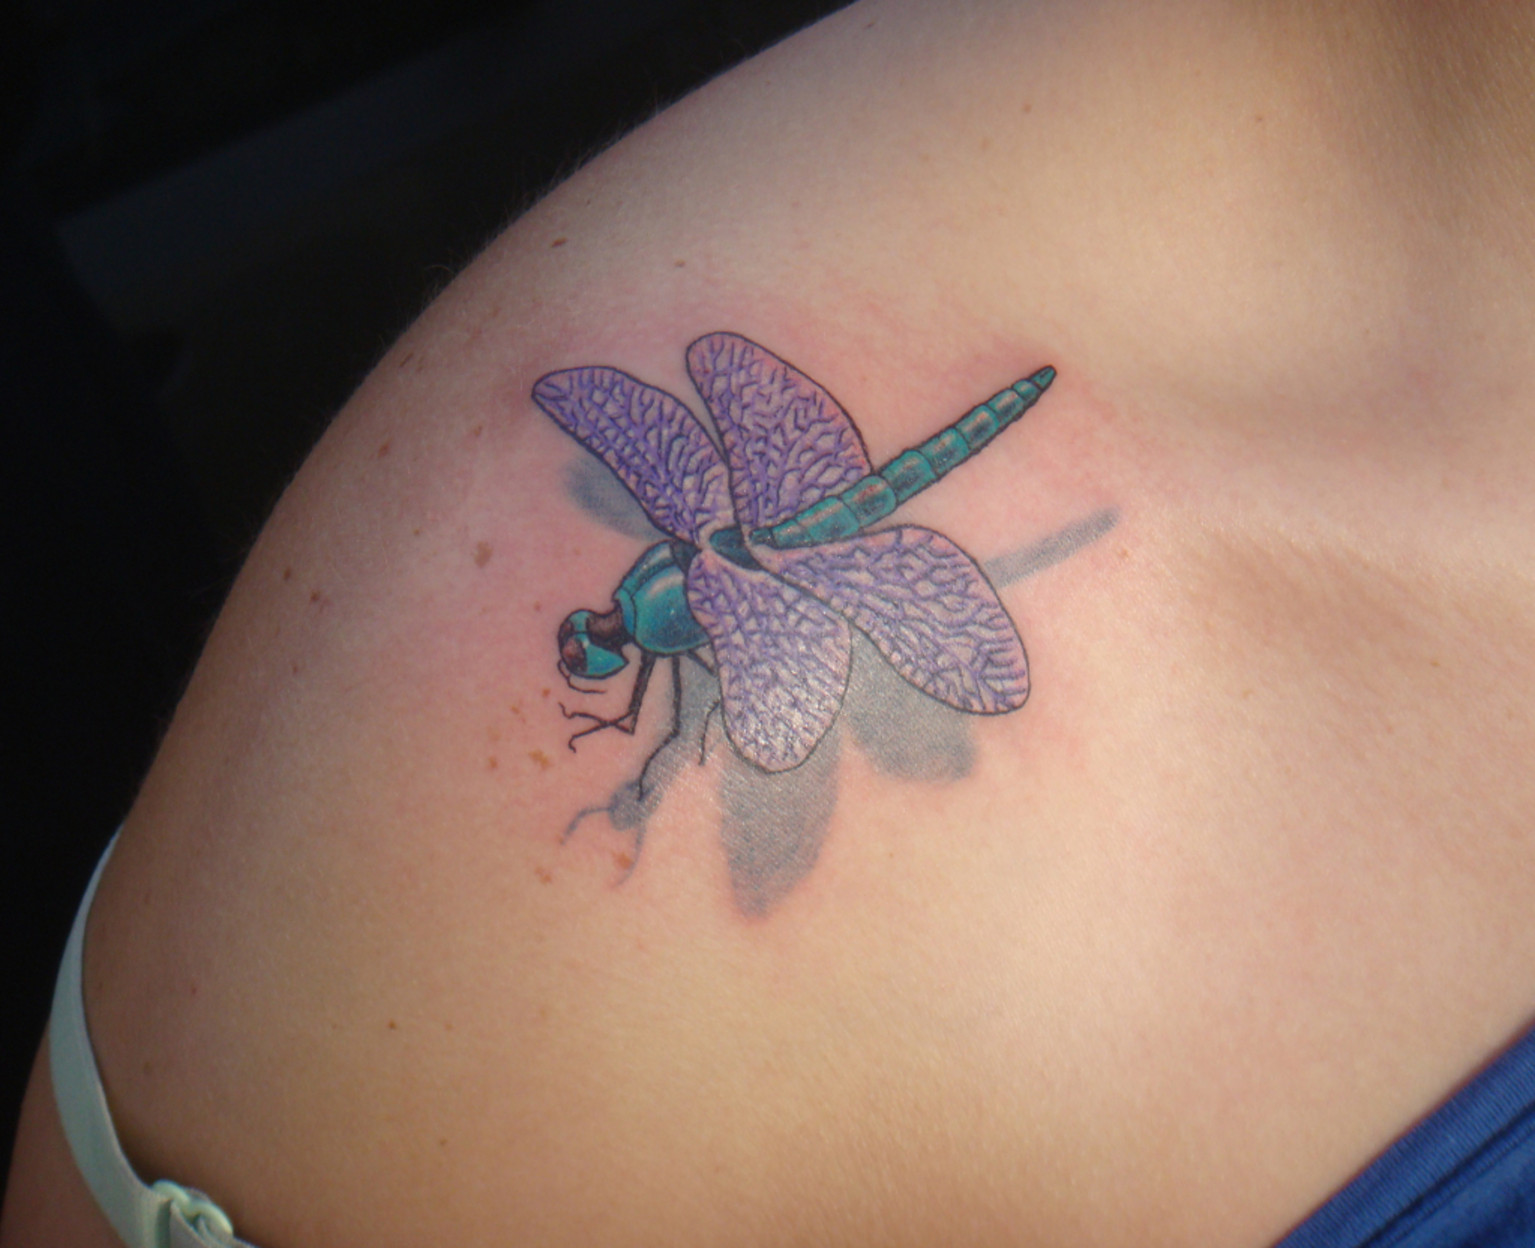 3. The History of Dragonfly Tattoos - wide 4